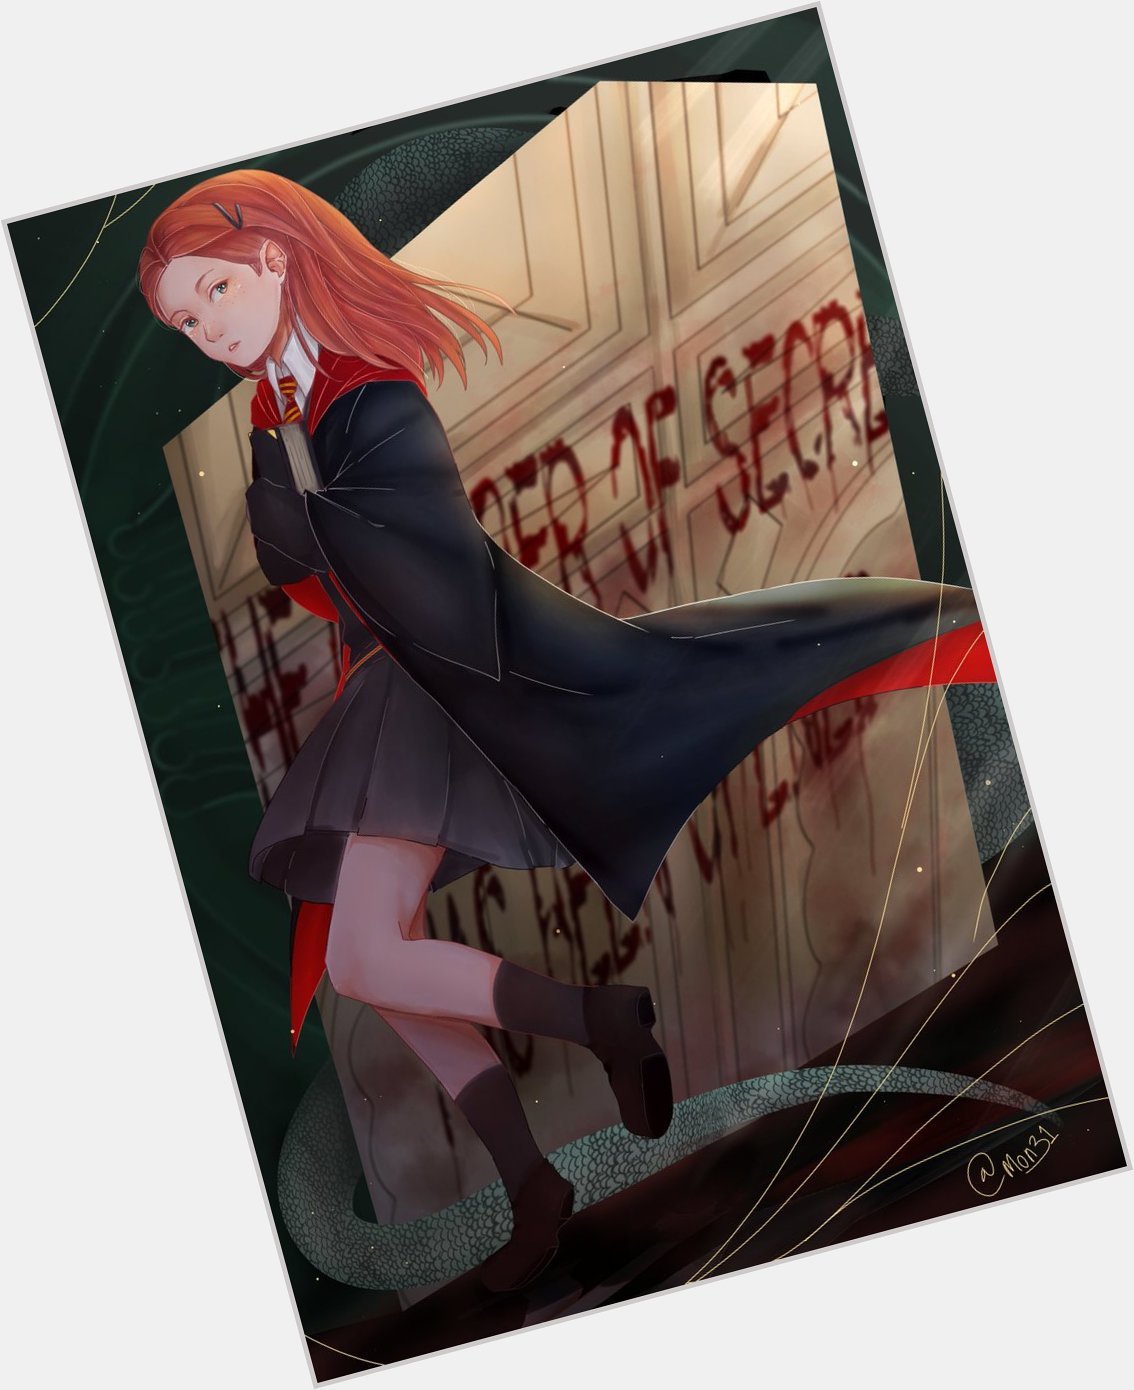 Happy Birthday ginny weasley  chamber of secret 
Tap for full pic 